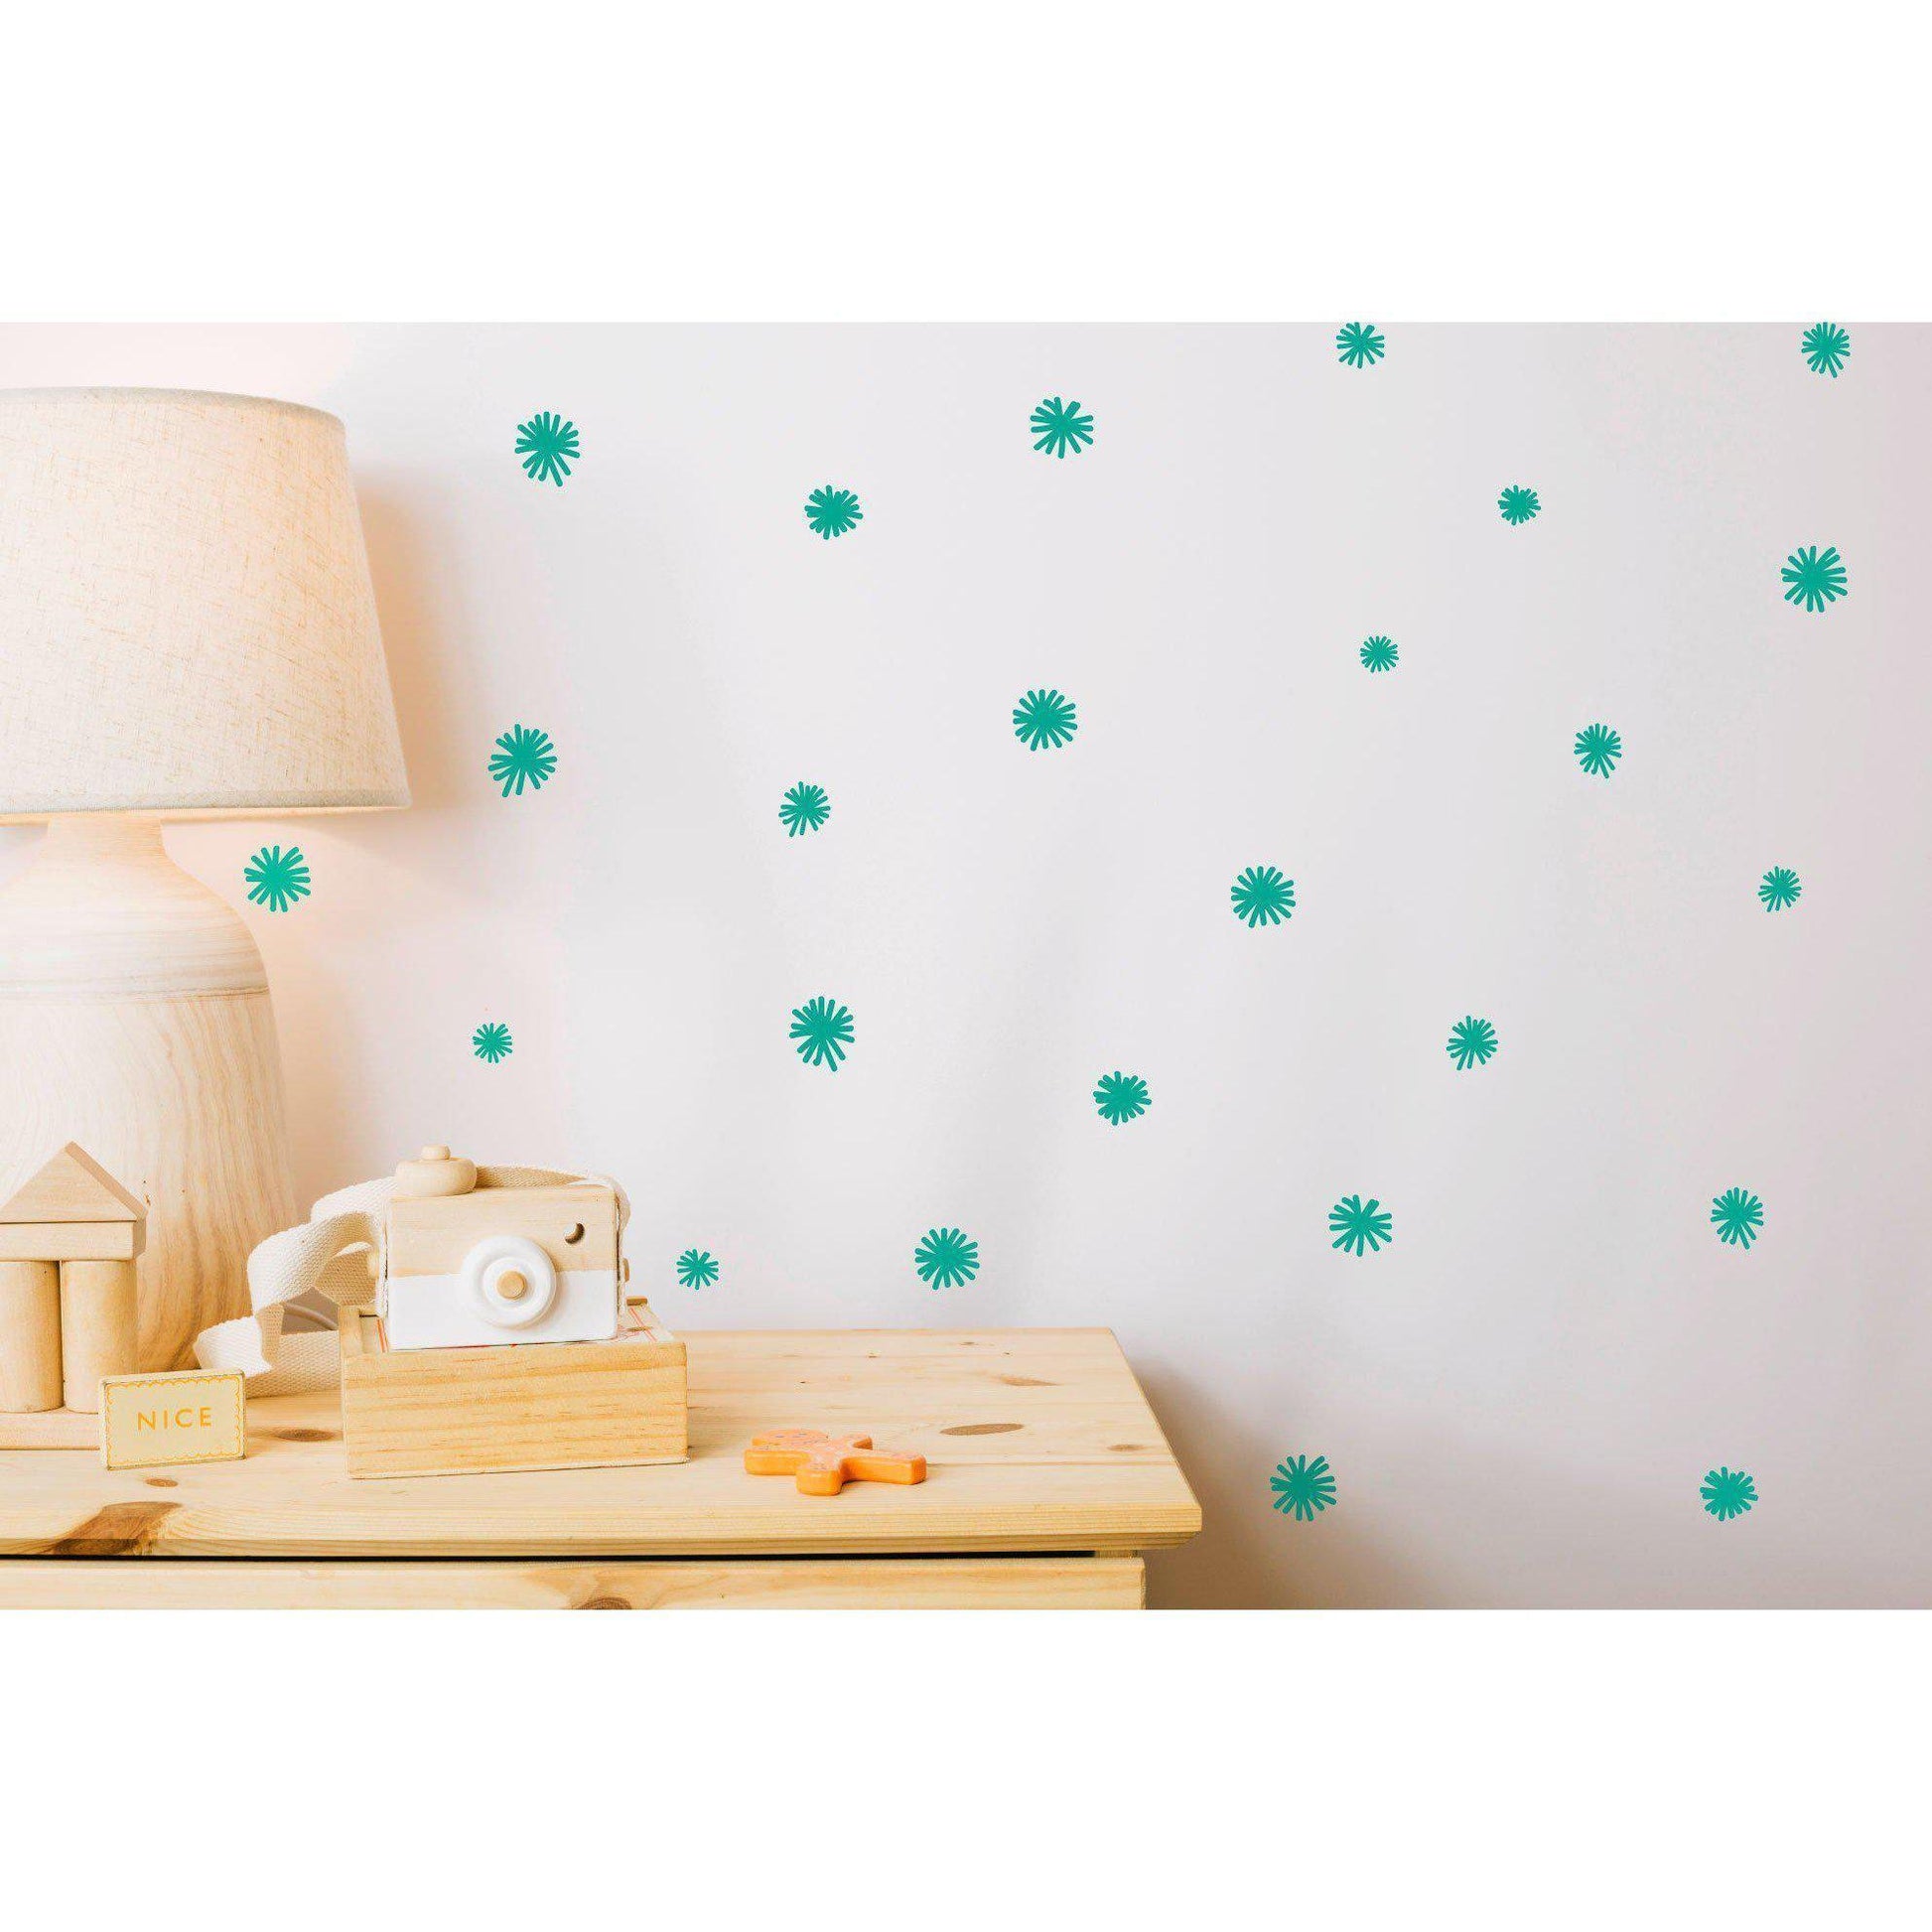 Spike Ball Wall Decal Stickers Home Decor Wall Art For Living Room Office Nursery Bedroom Wall Stickers 36 Colours